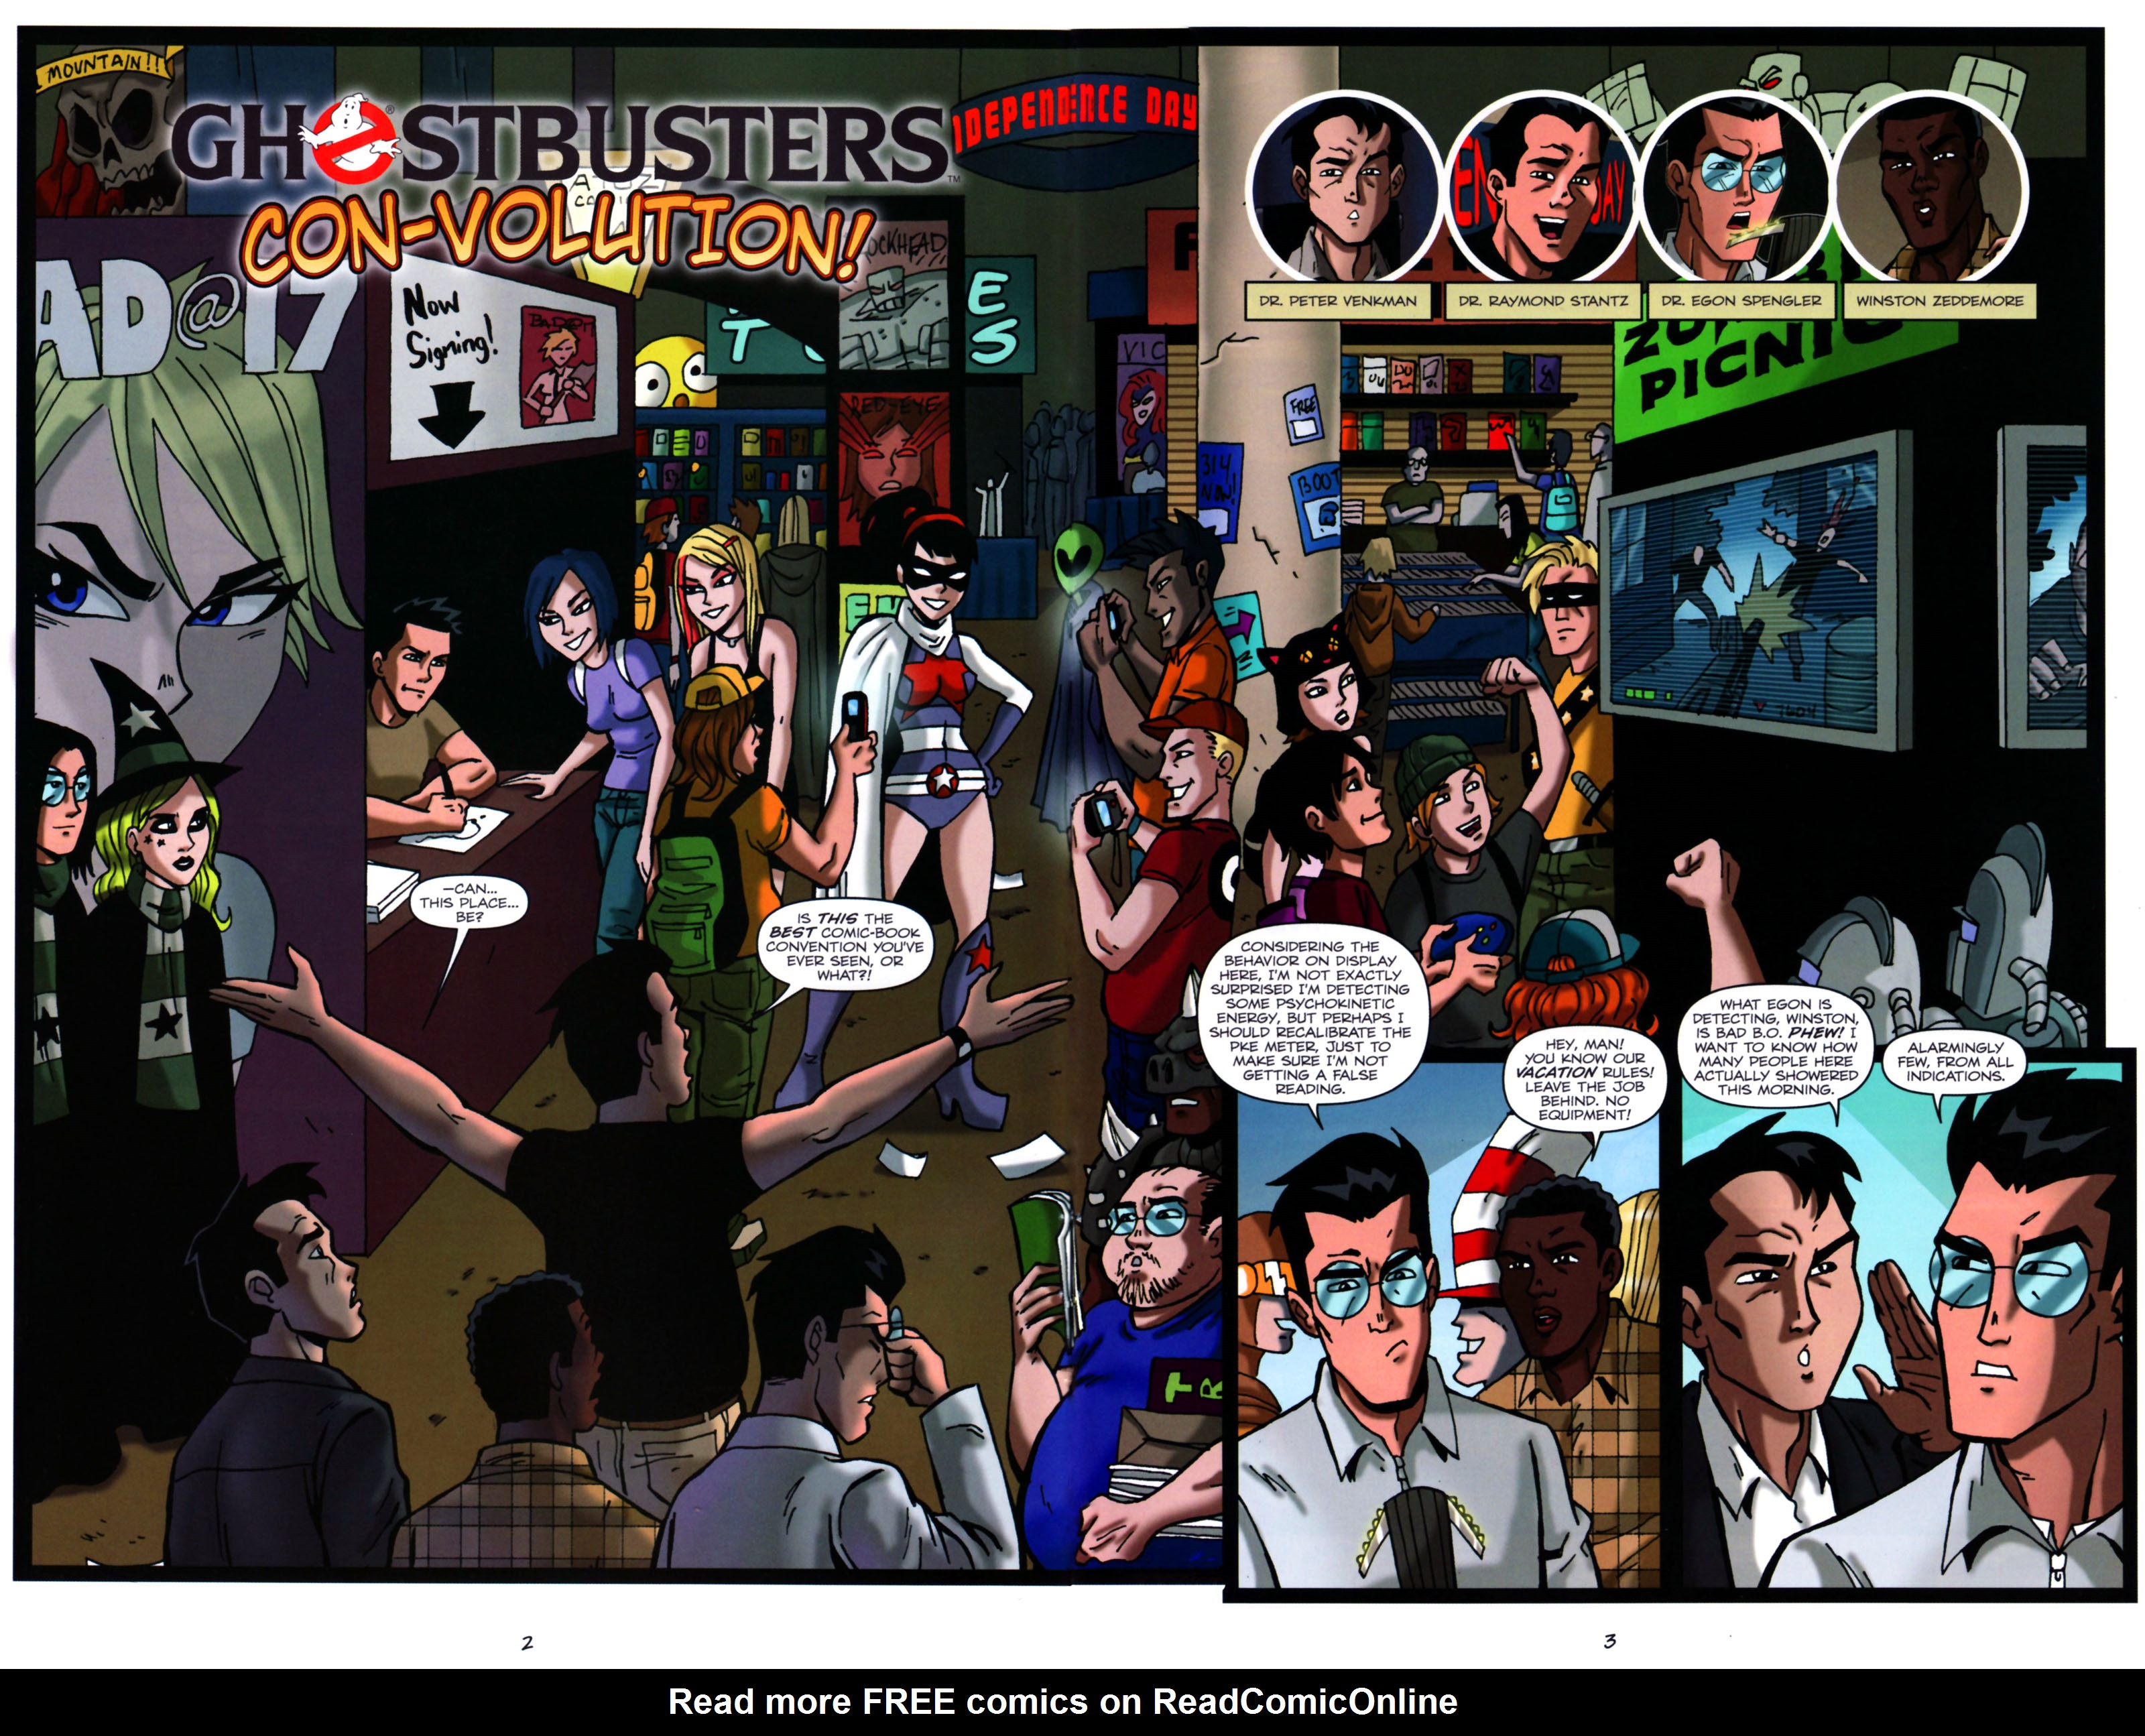 Read online Ghostbusters: Con-Volution comic -  Issue # Full - 6